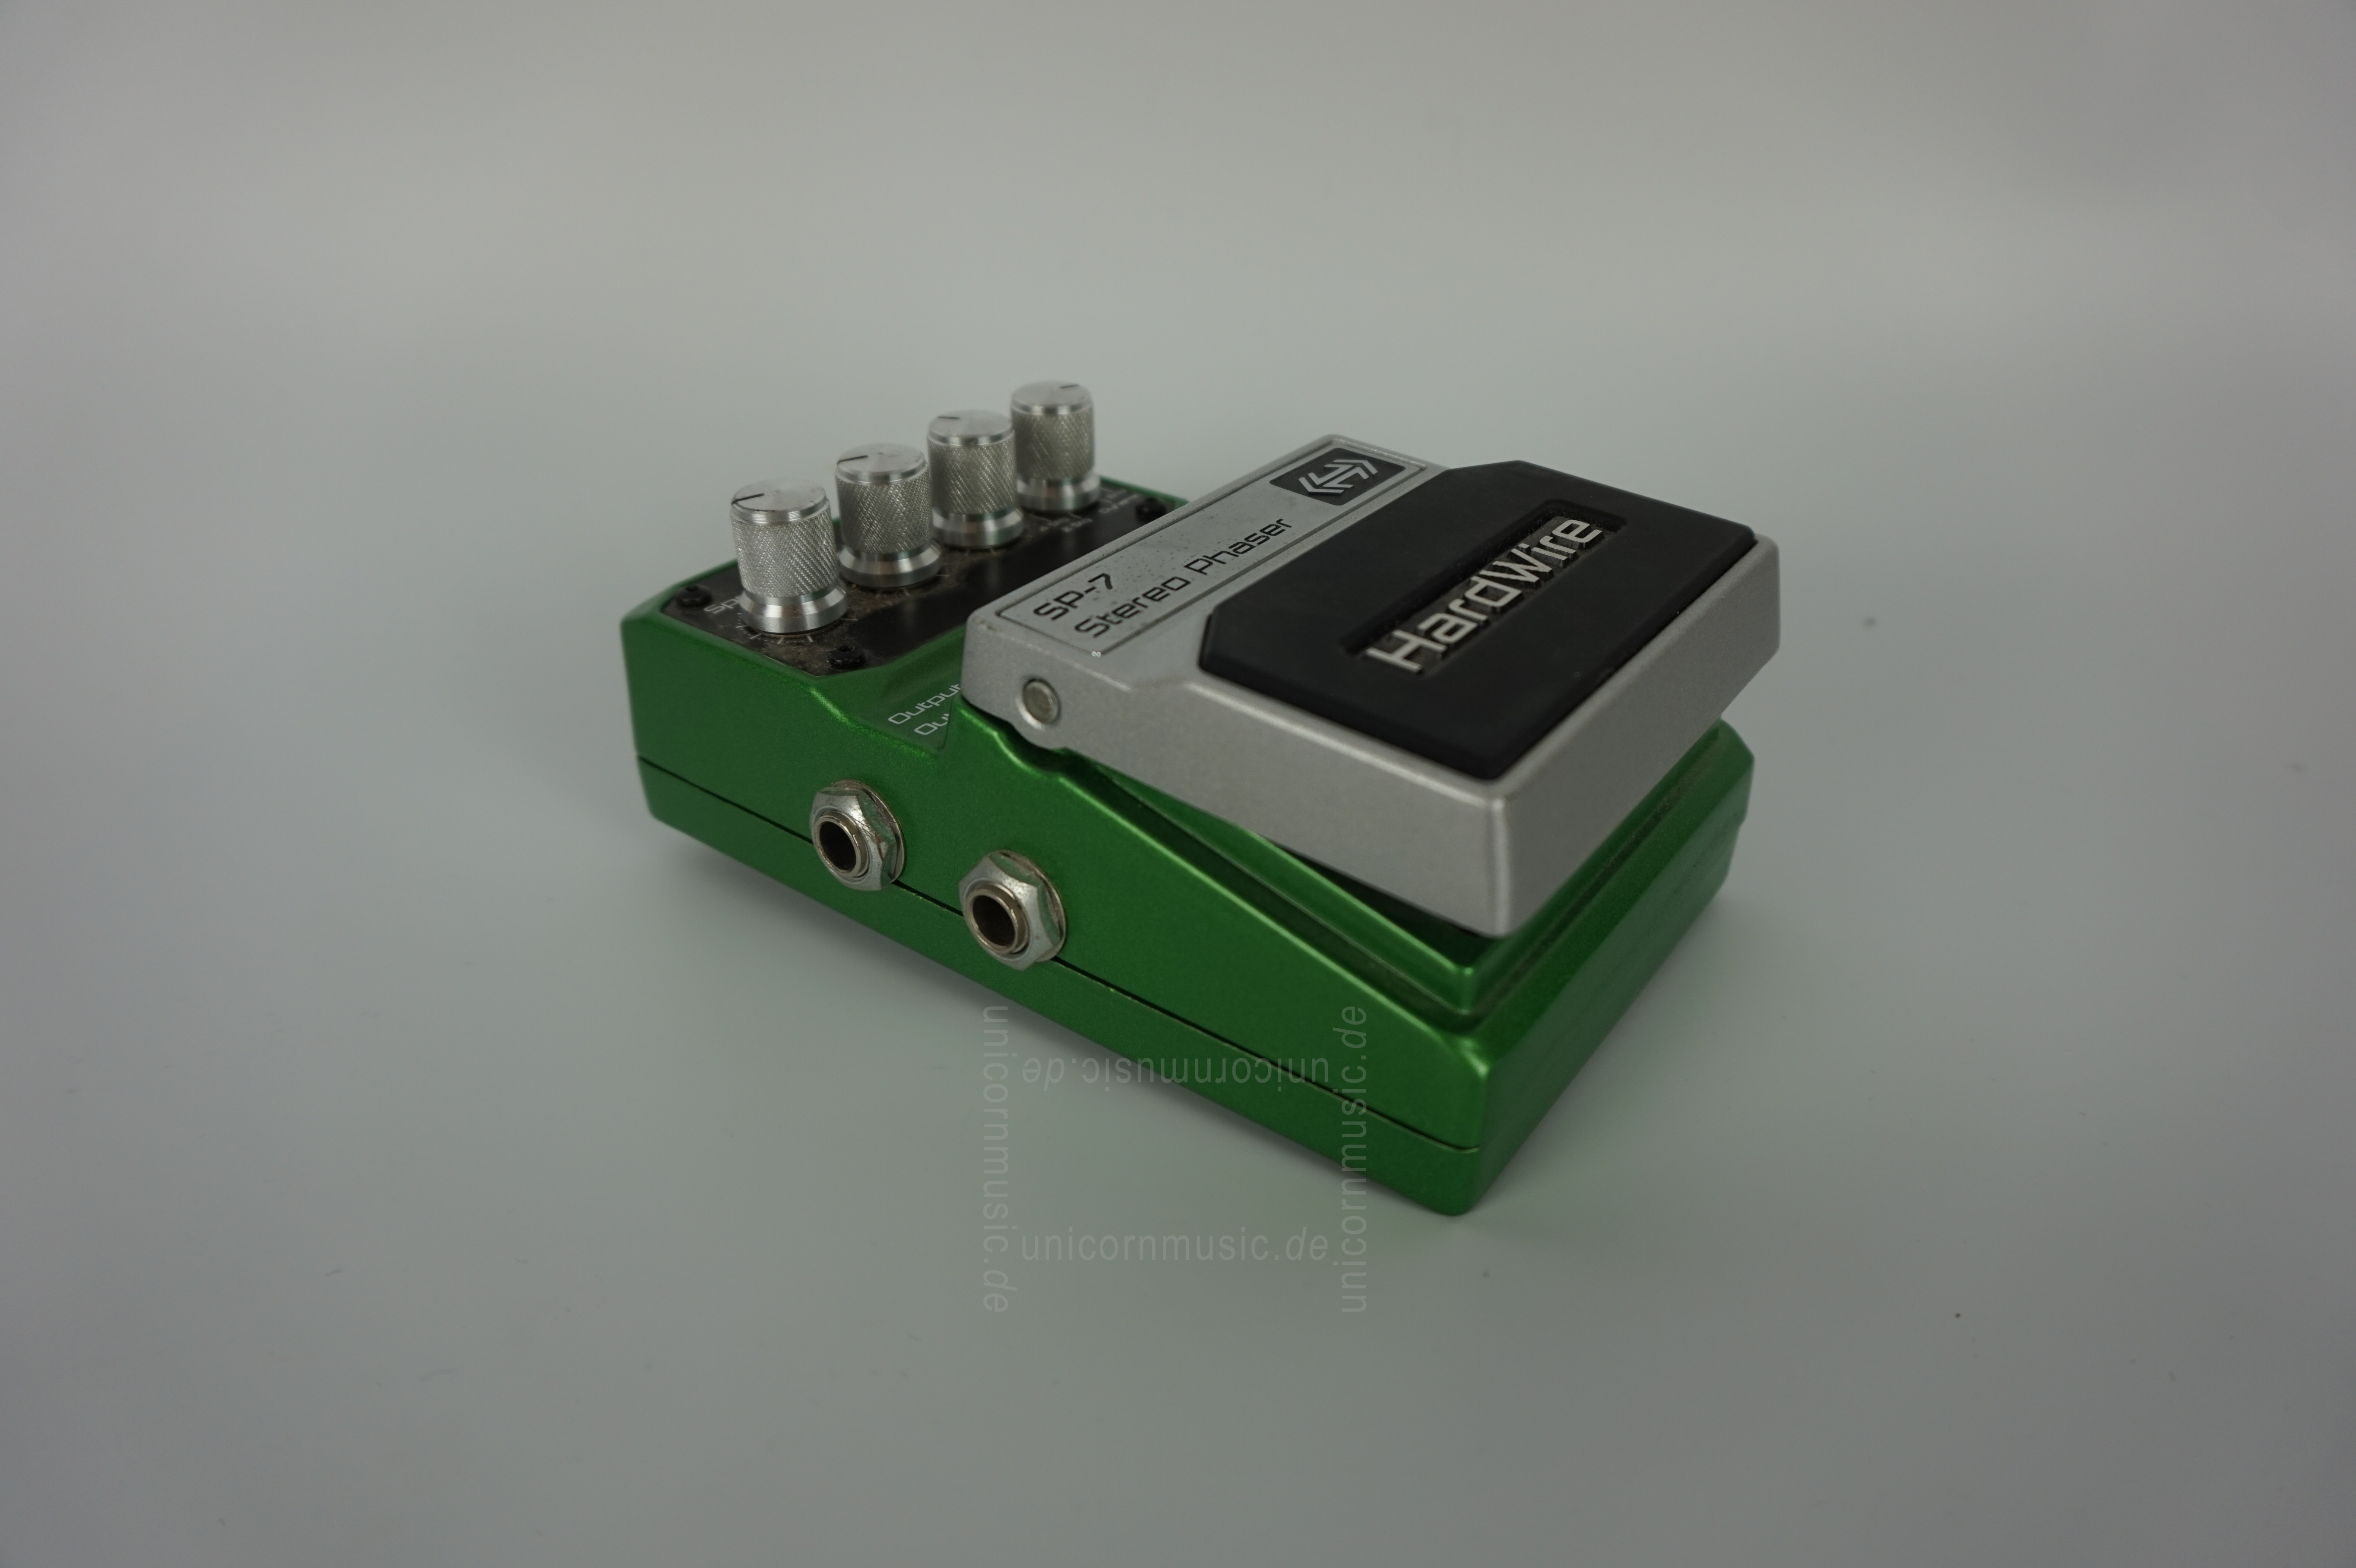 to article description / price Hardwire SP-7 Stereo Phaser